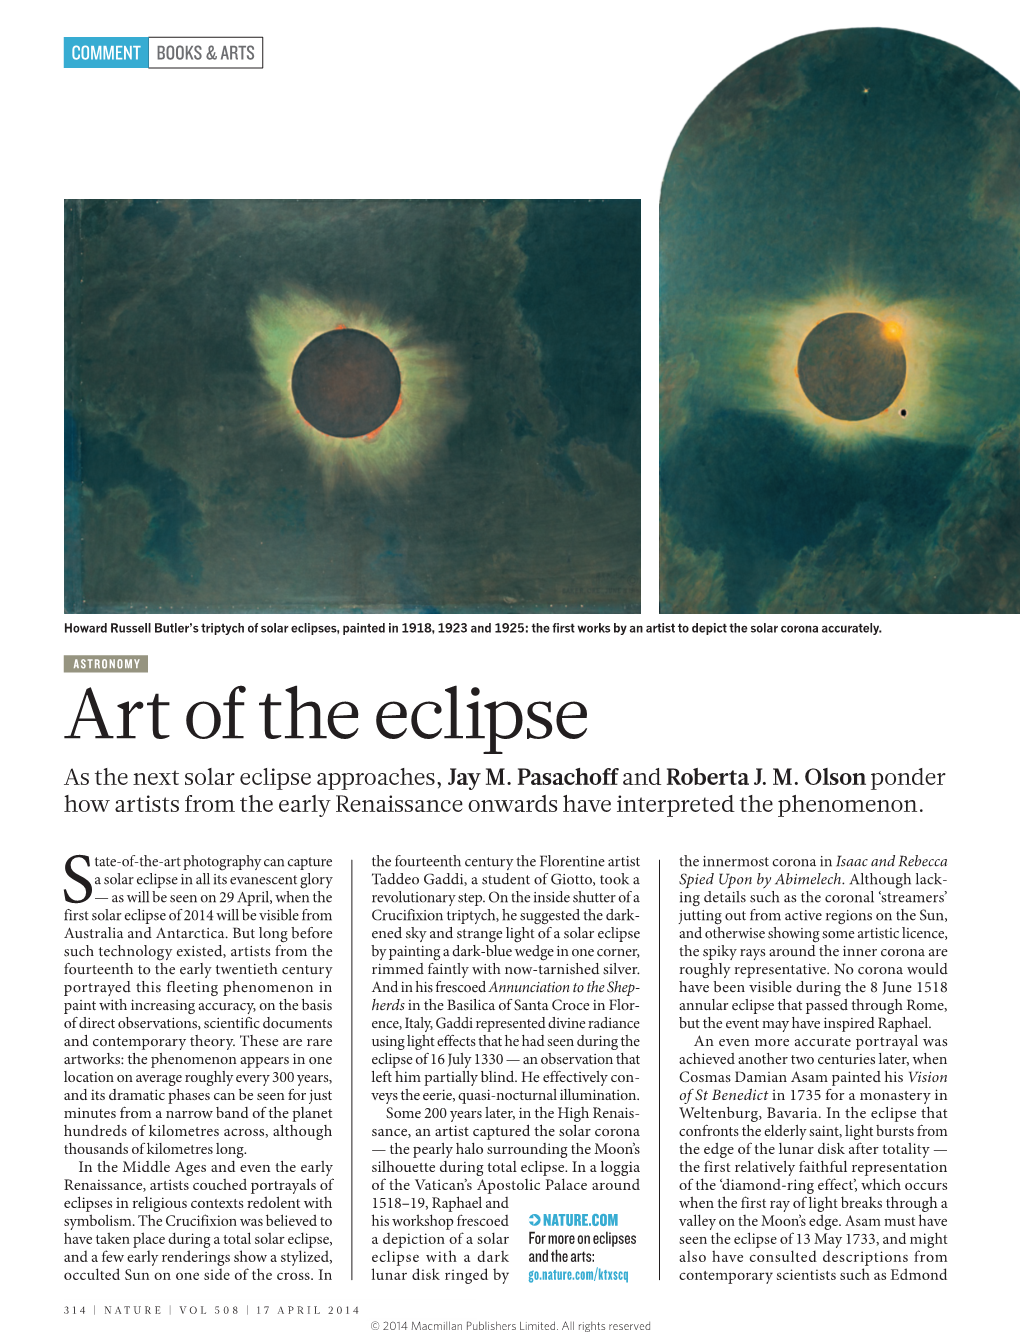 Art of the Eclipse As the Next Solar Eclipse Approaches, Jay M